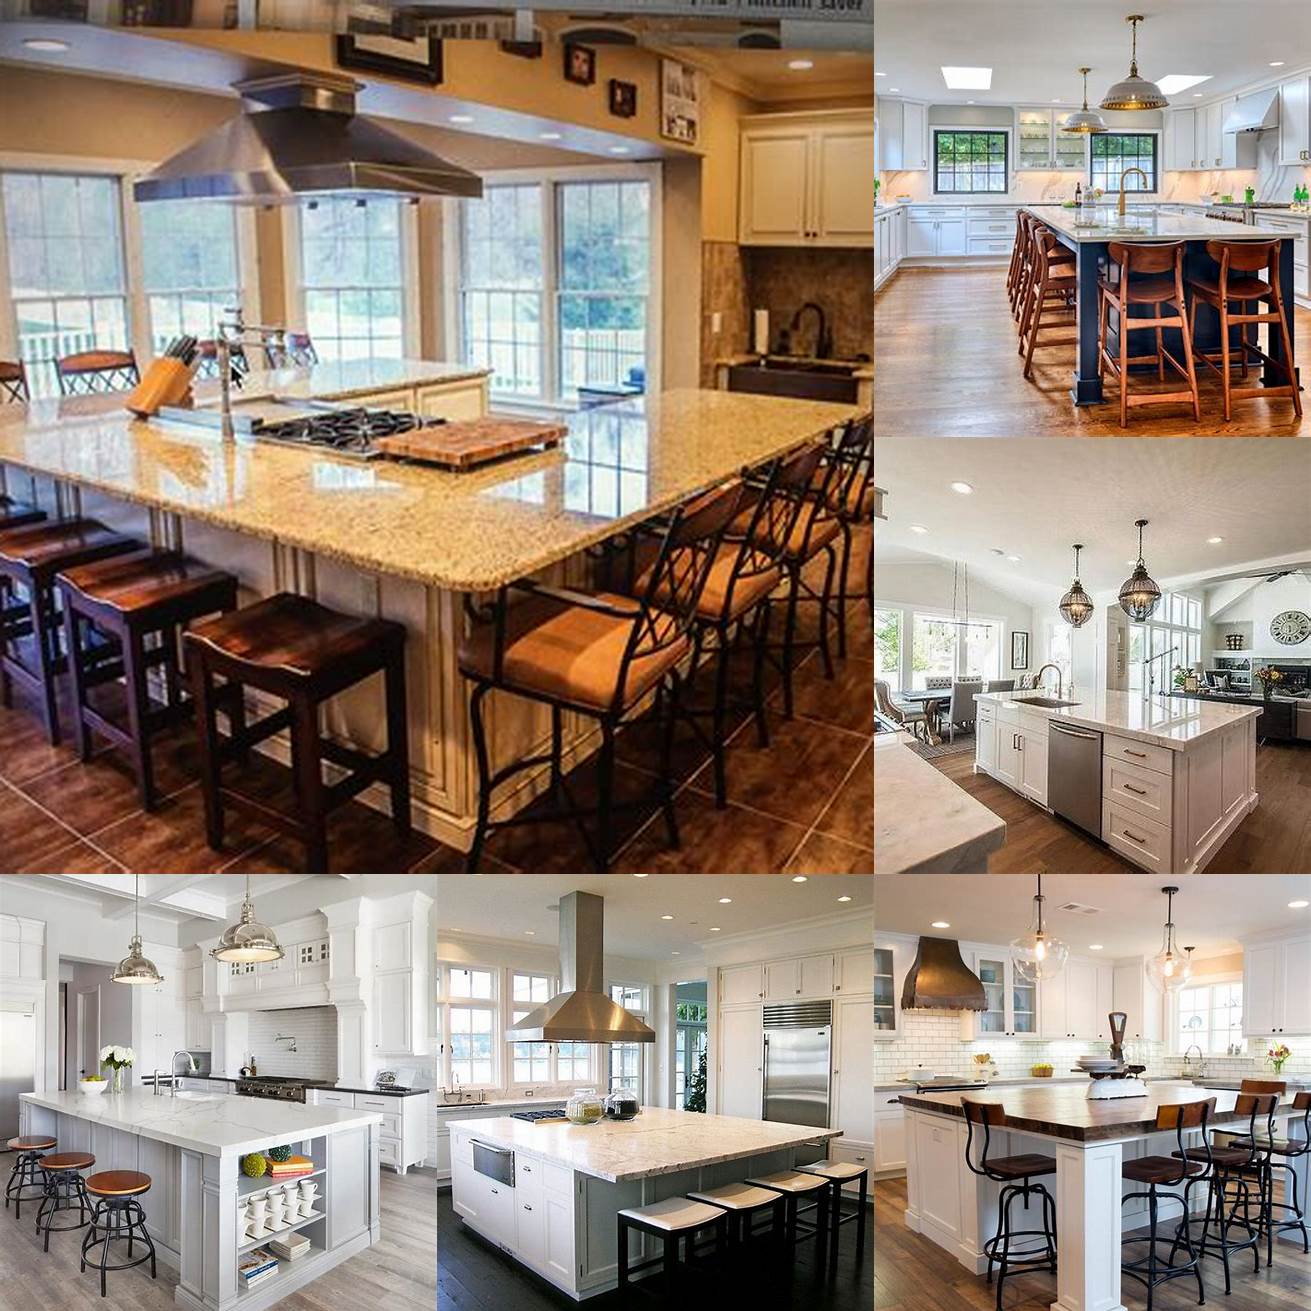 Large kitchen island with built-in sink and seating